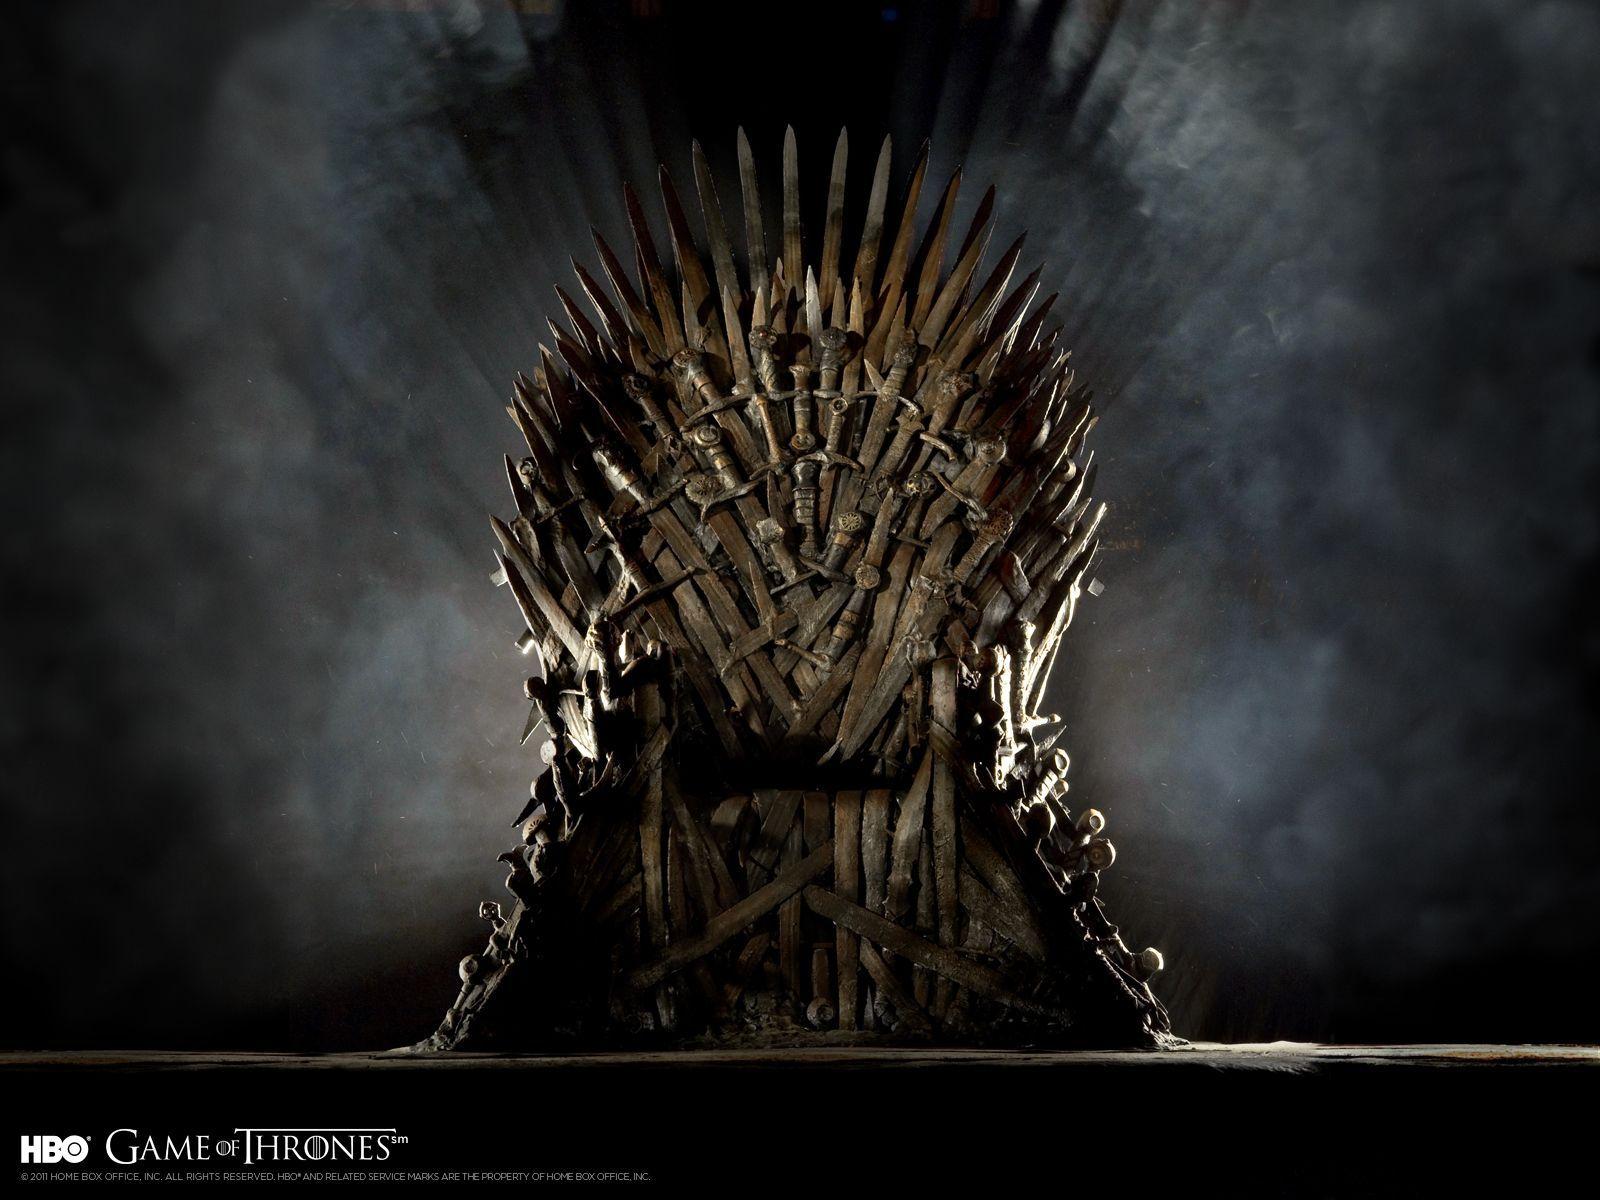 View, download, comment, and rate this 1600x1200 Game of thrones